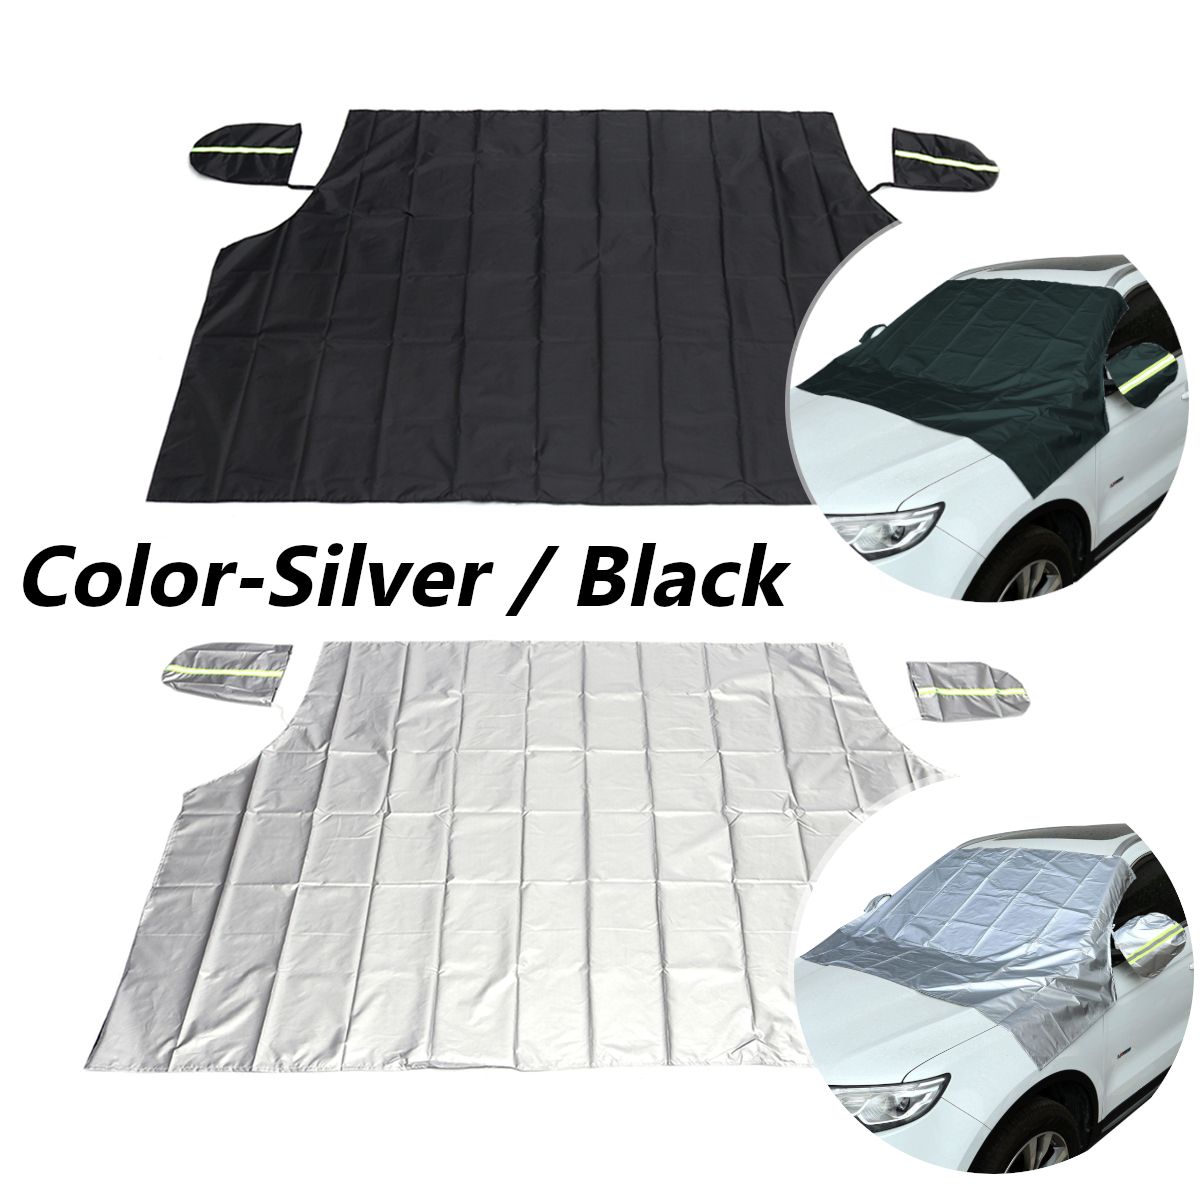 234x146x178cm-Green-Car-Magnetic-Windshield-Cover-Snow-Sun-Dust-Protector-for-Pickup-SUV-1416639